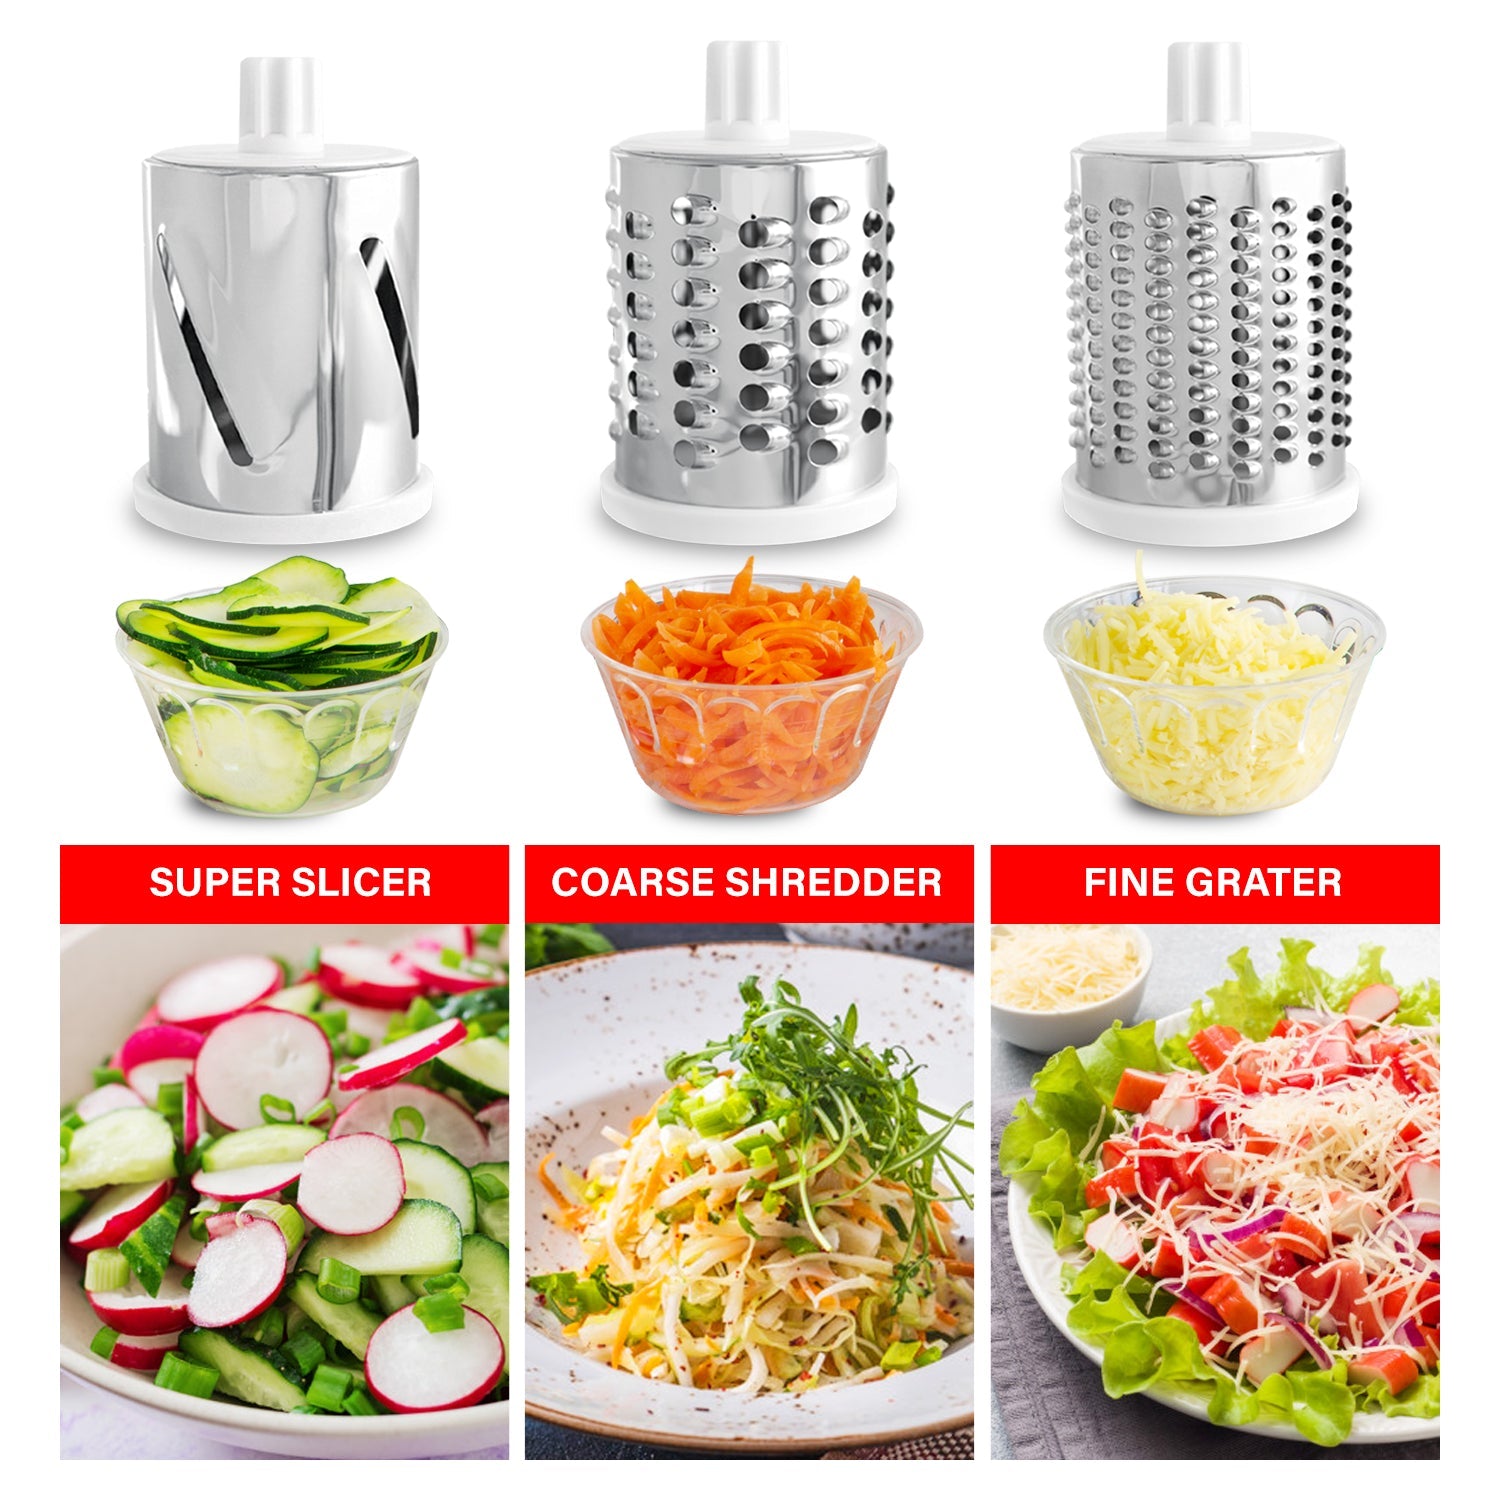 Sumo Slicer - The 3-in-1 food preparation system. Slice, grate and